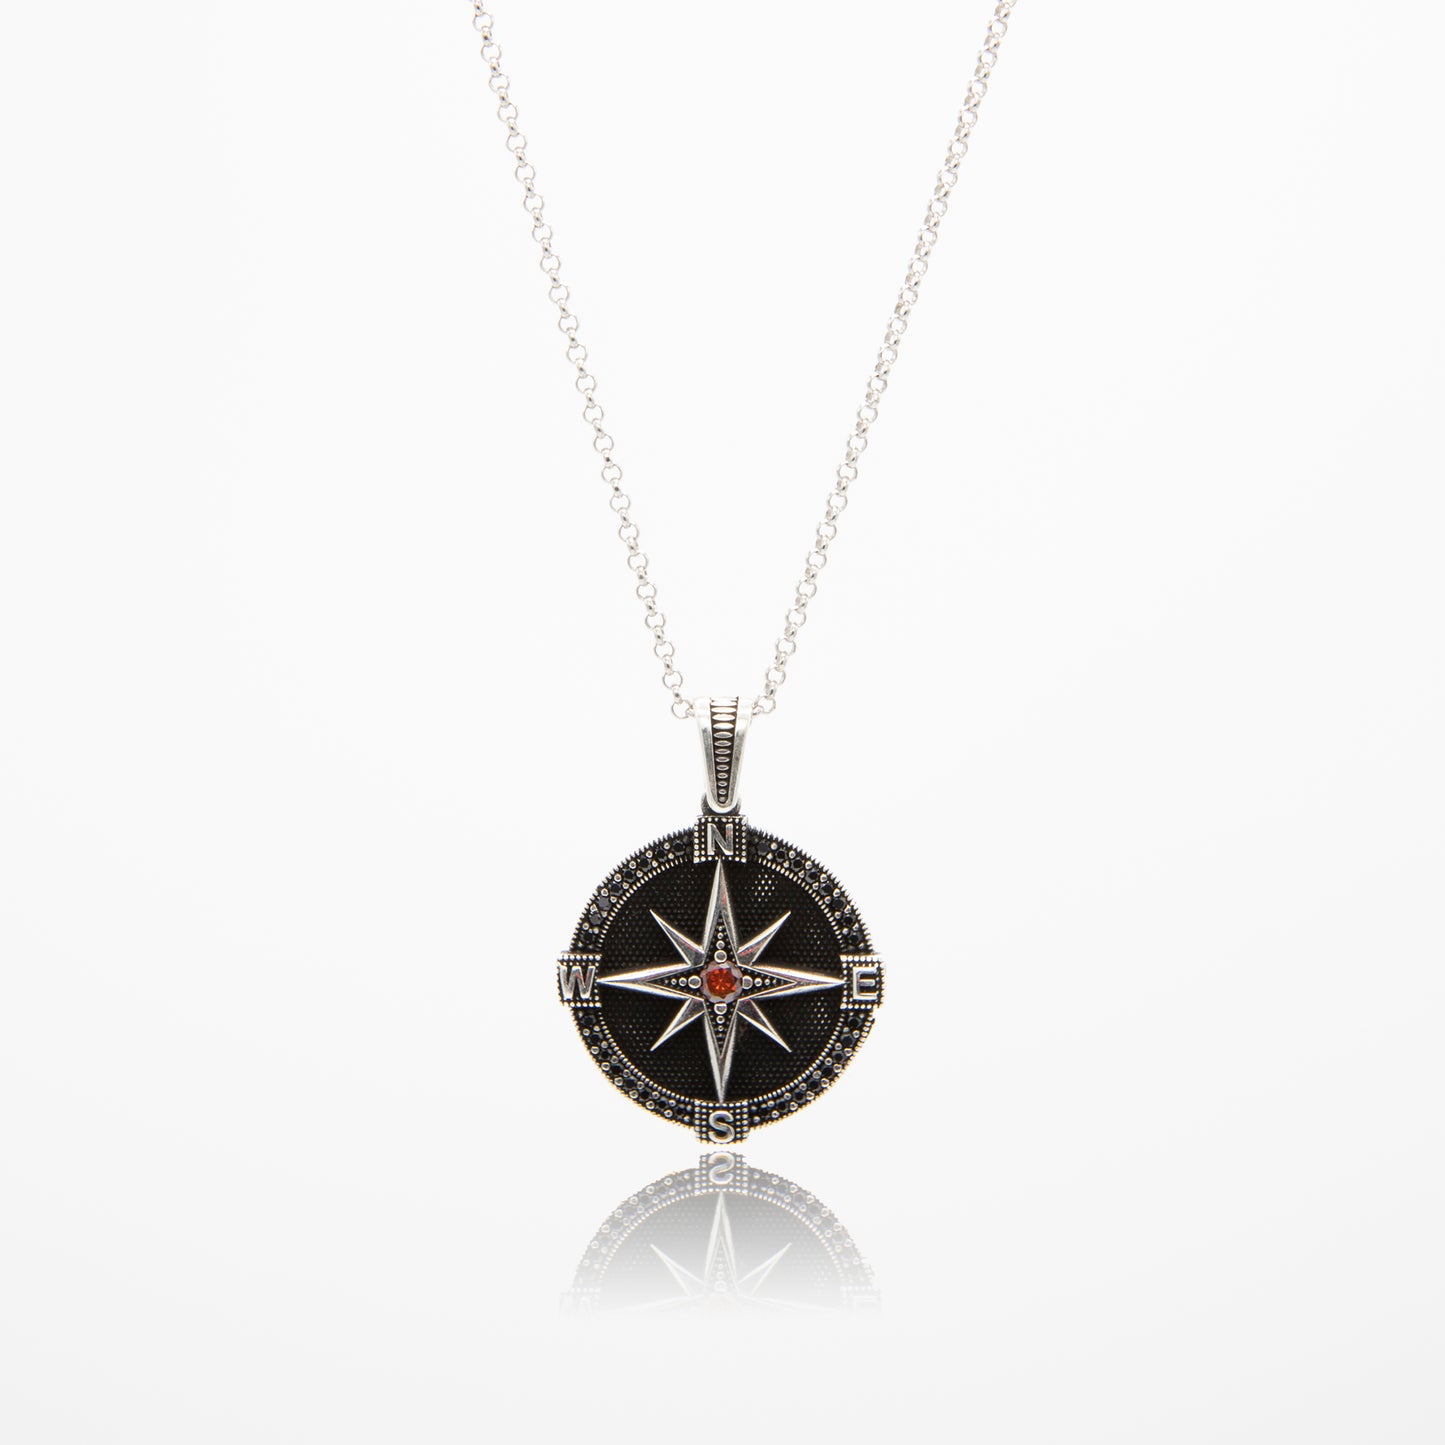 Red Crowned Compass Pendant 925 Sterling Silver with Rhodium Plated High Quality Real Silver Circle Rolo Link Chain